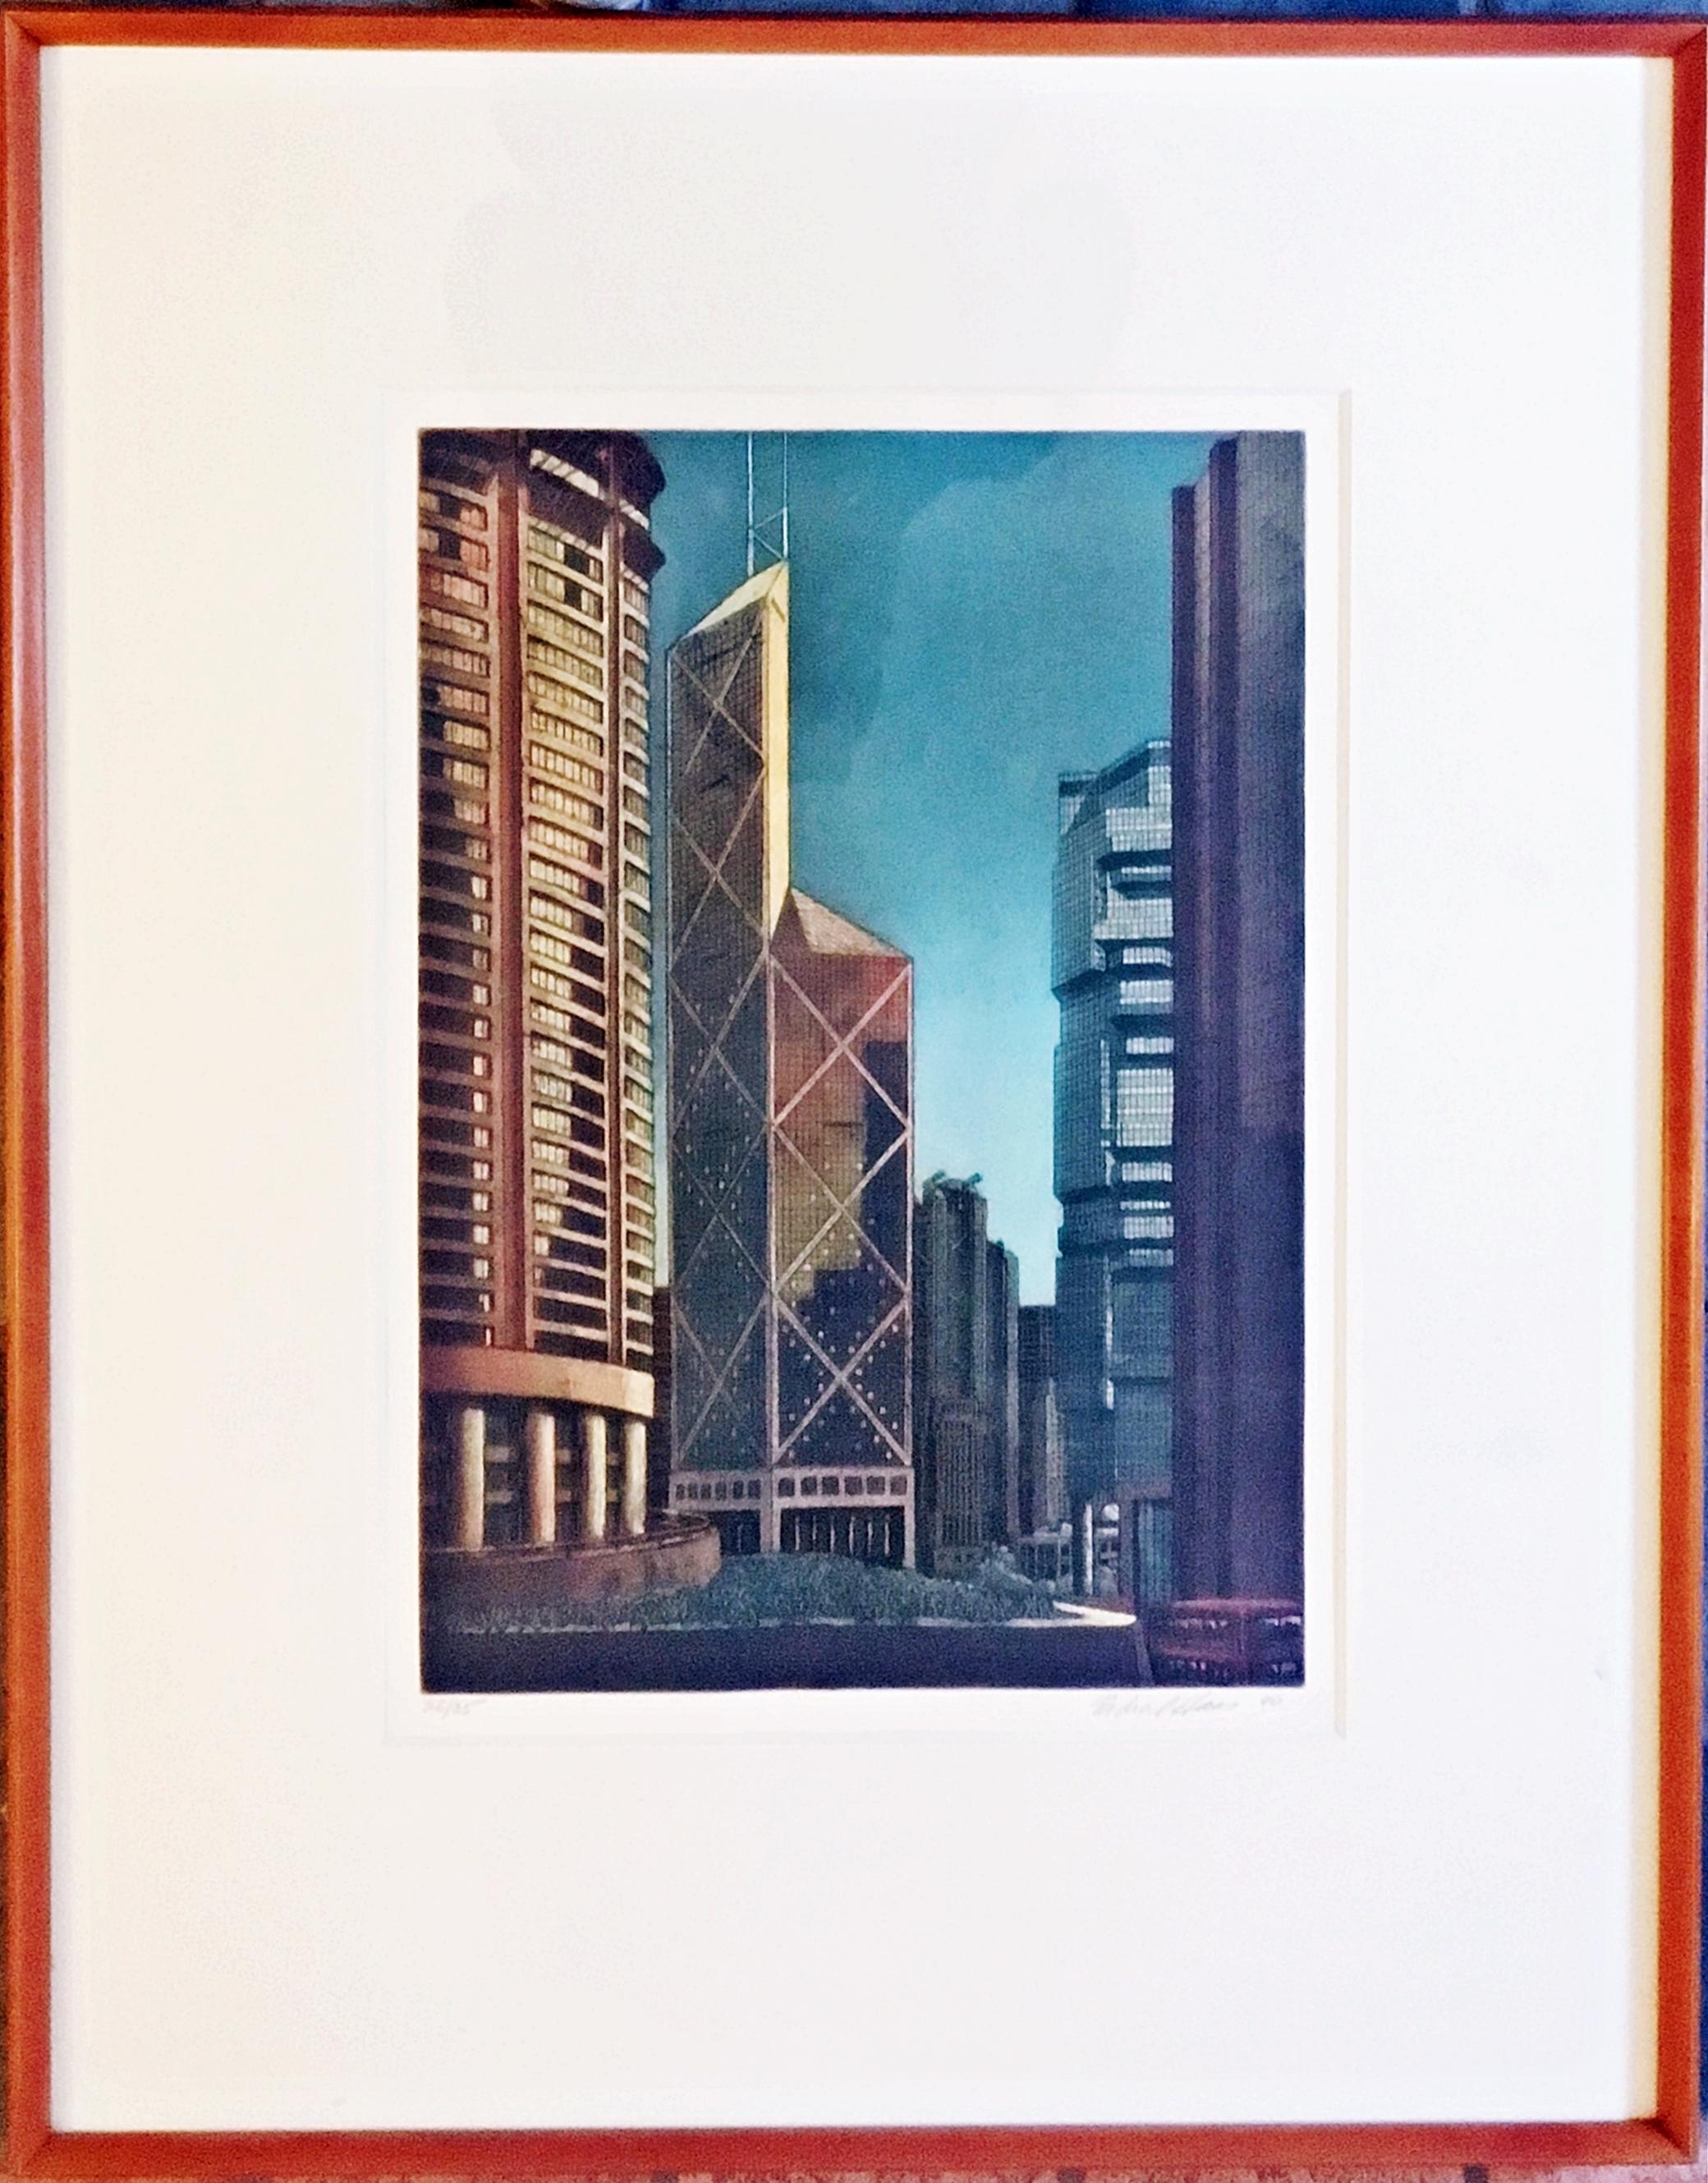 Richard Haas 
Hong Kong, 1990
Etching and Aquatint on wove paper
Hand Signed, numbered and dated on the front
Frame included; held in the original vintage hand made wood frame done by PSG 
This impressive, framed lithograph of Hong Kong is by